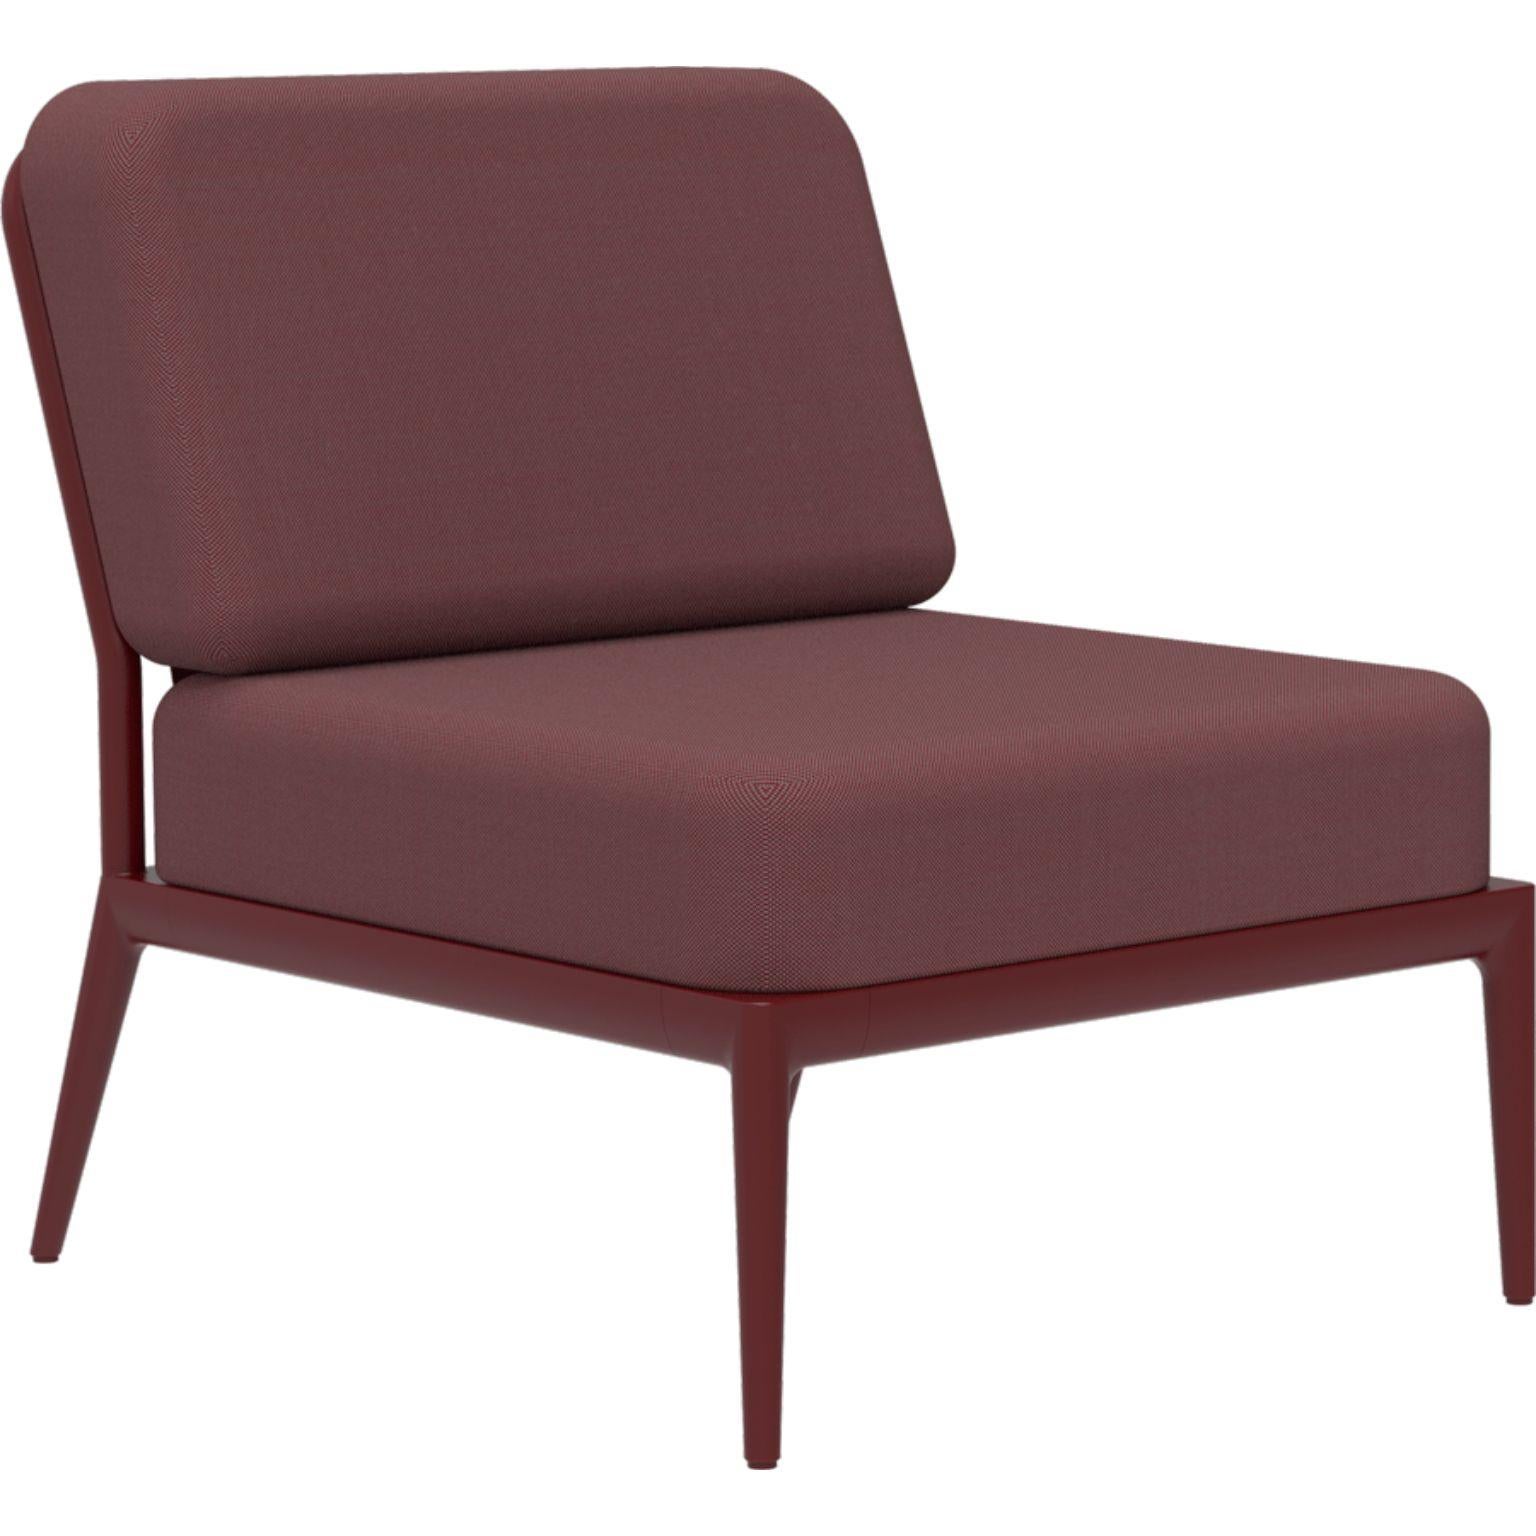 Ribbons burgundy central modular sofa by MOWEE
Dimensions: D83 x W68 x H81 cm.
Material: Aluminium and upholstery.
Weight: 17 kg.
Also available in different colors and finishes. 

An unmistakable collection for its beauty and robustness. A